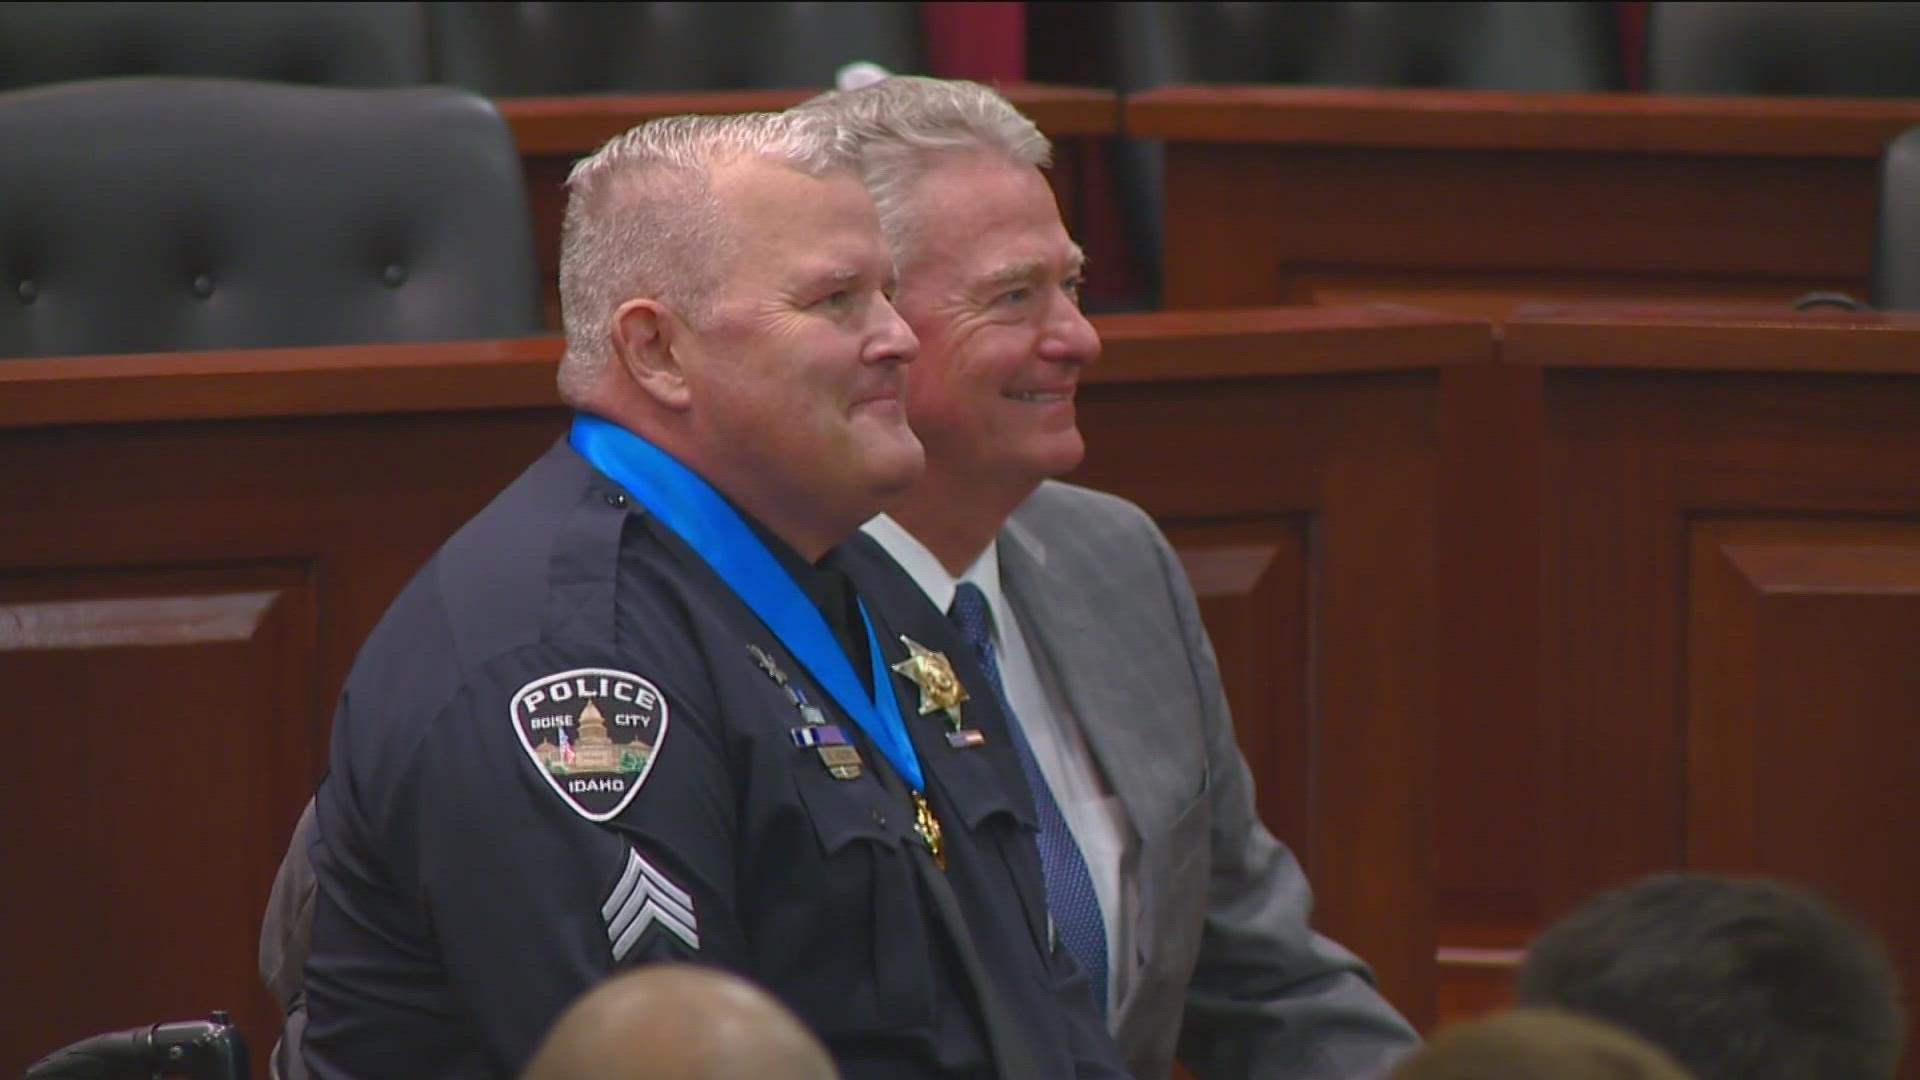 In 2004, the Idaho Medal of Honor was created by the Idaho Legislature as a way of recognizing first responders statewide for their heroic acts.